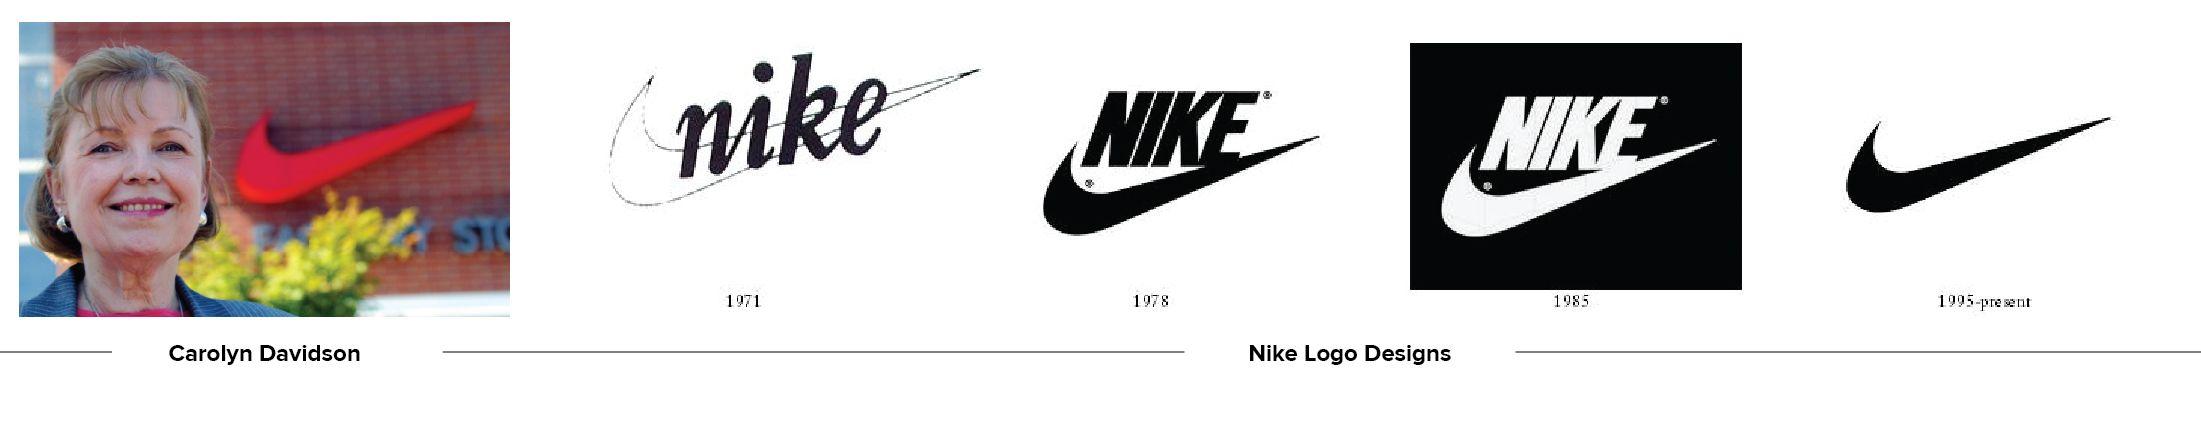 Nike Swoosh Logo - History of the Nike Swoosh | Logo Design by Tailor Brands